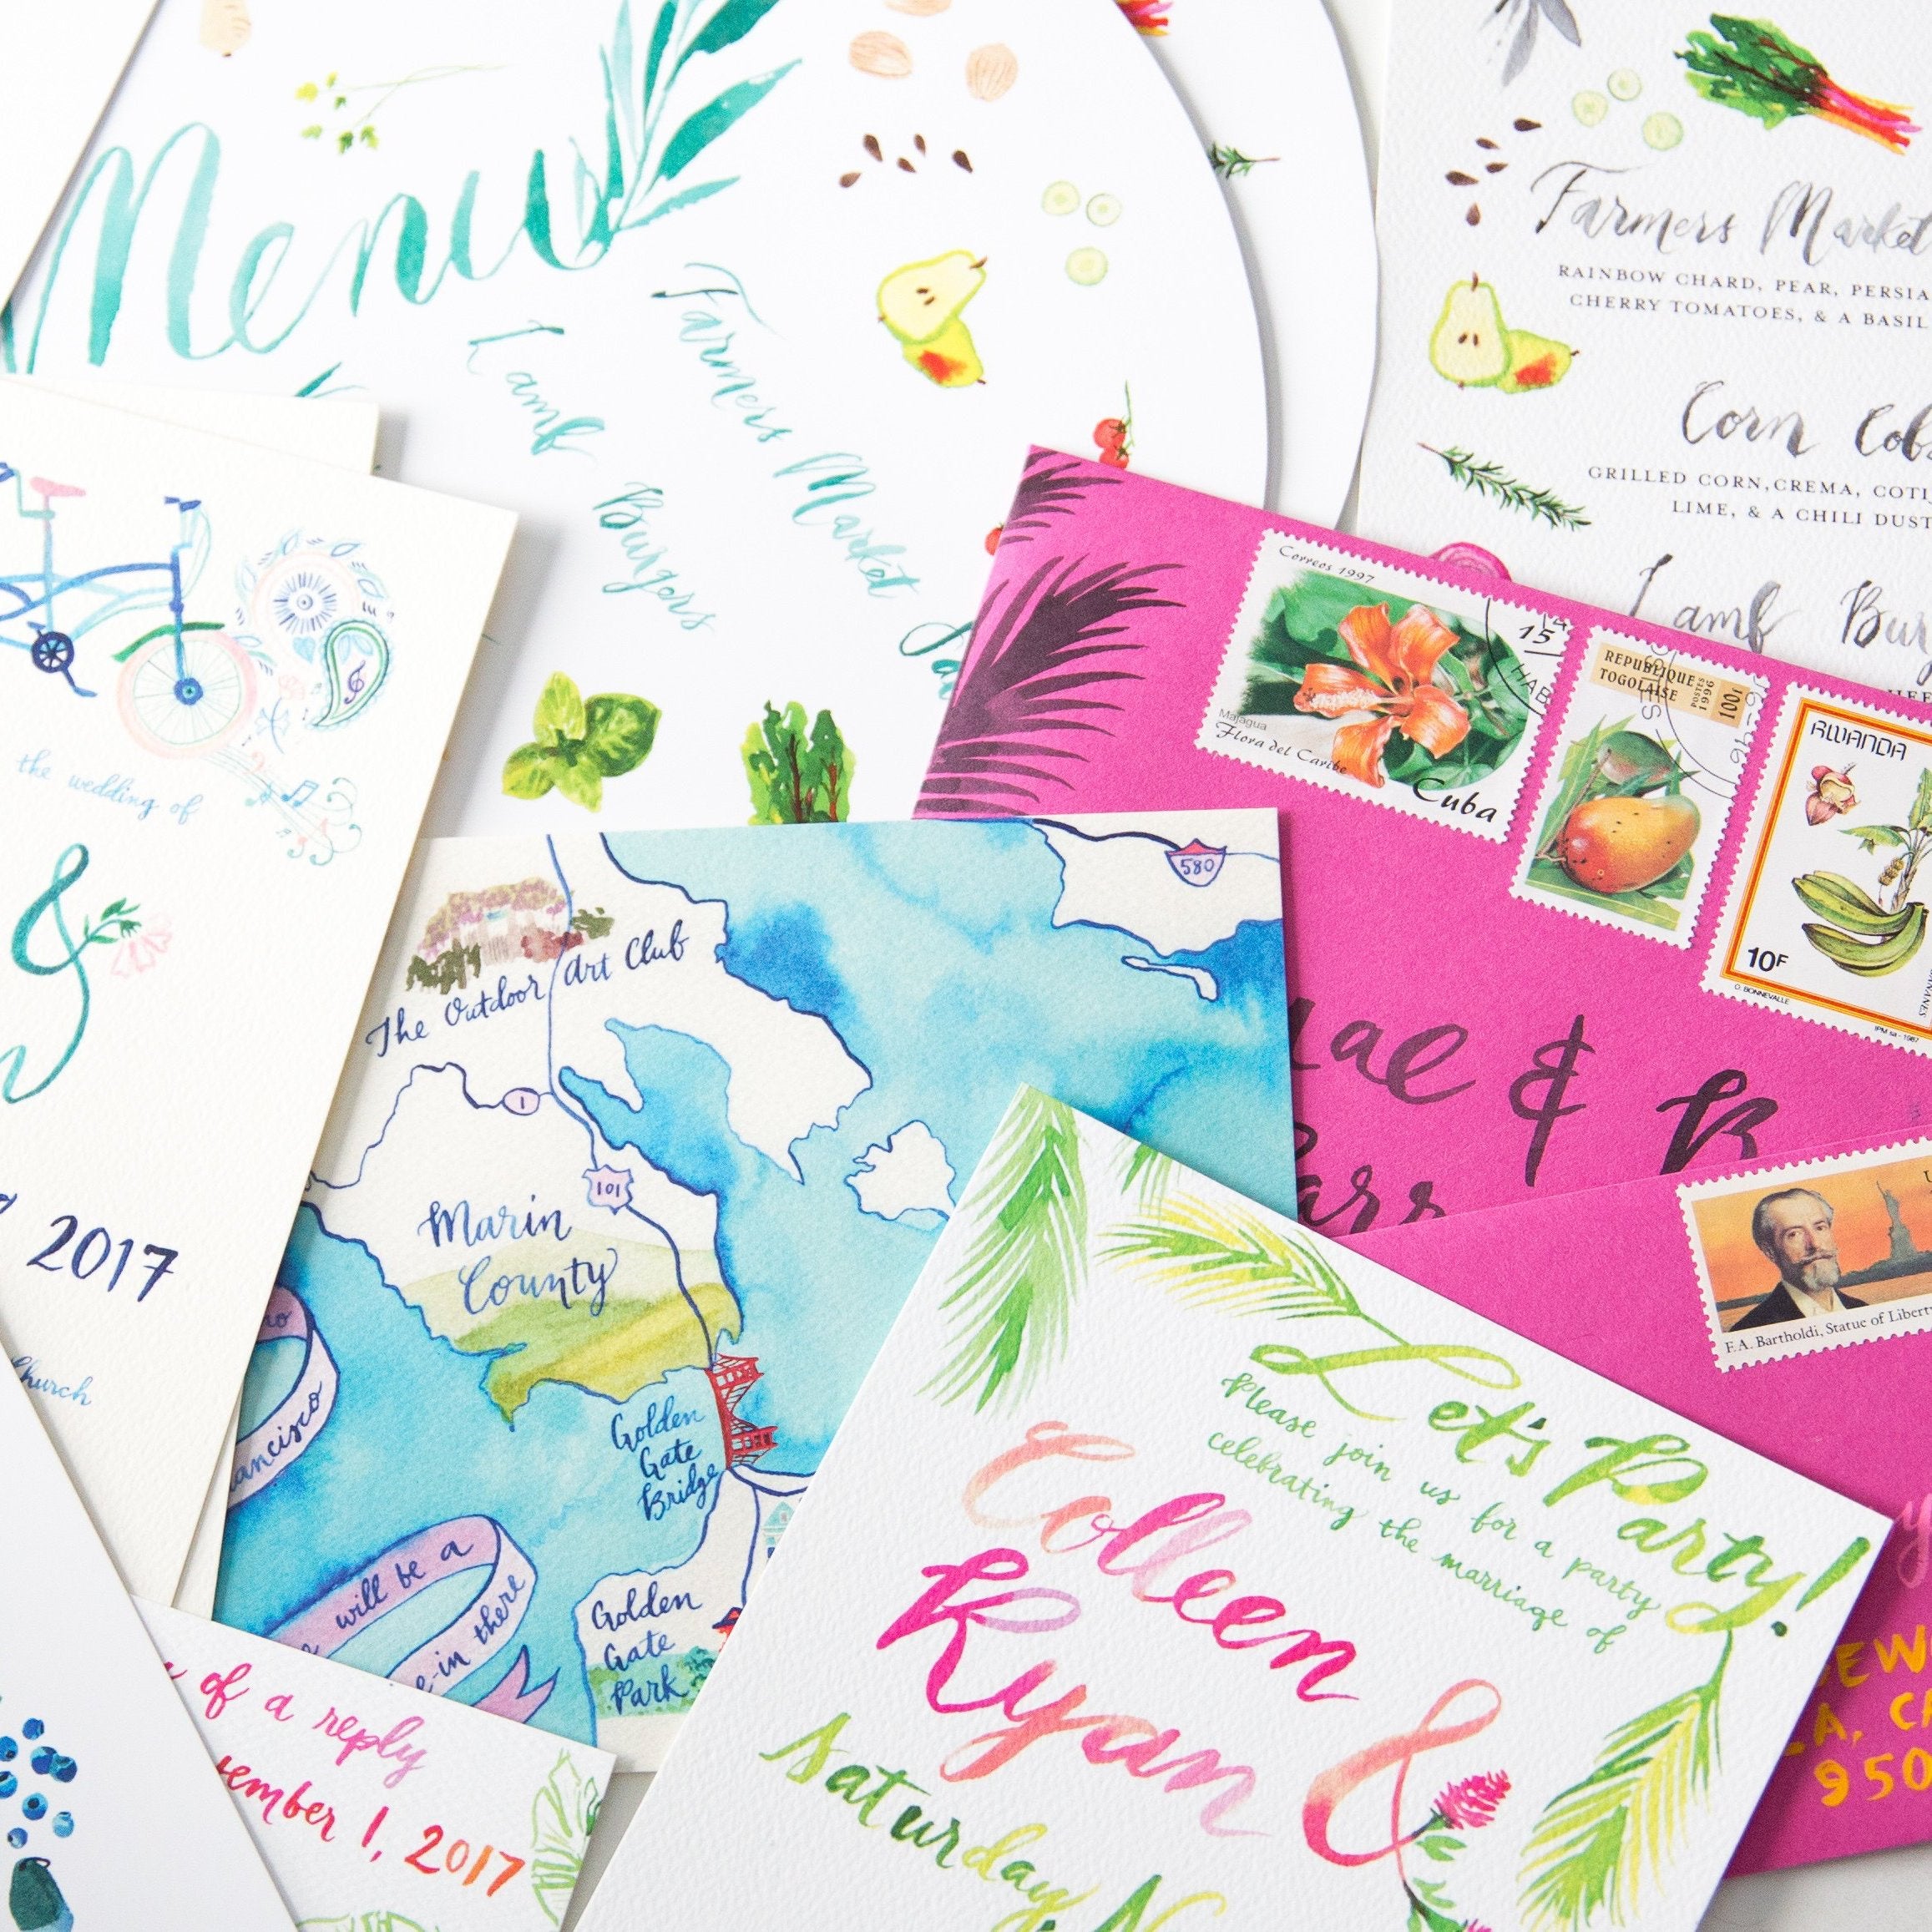 Colorful stationery samples